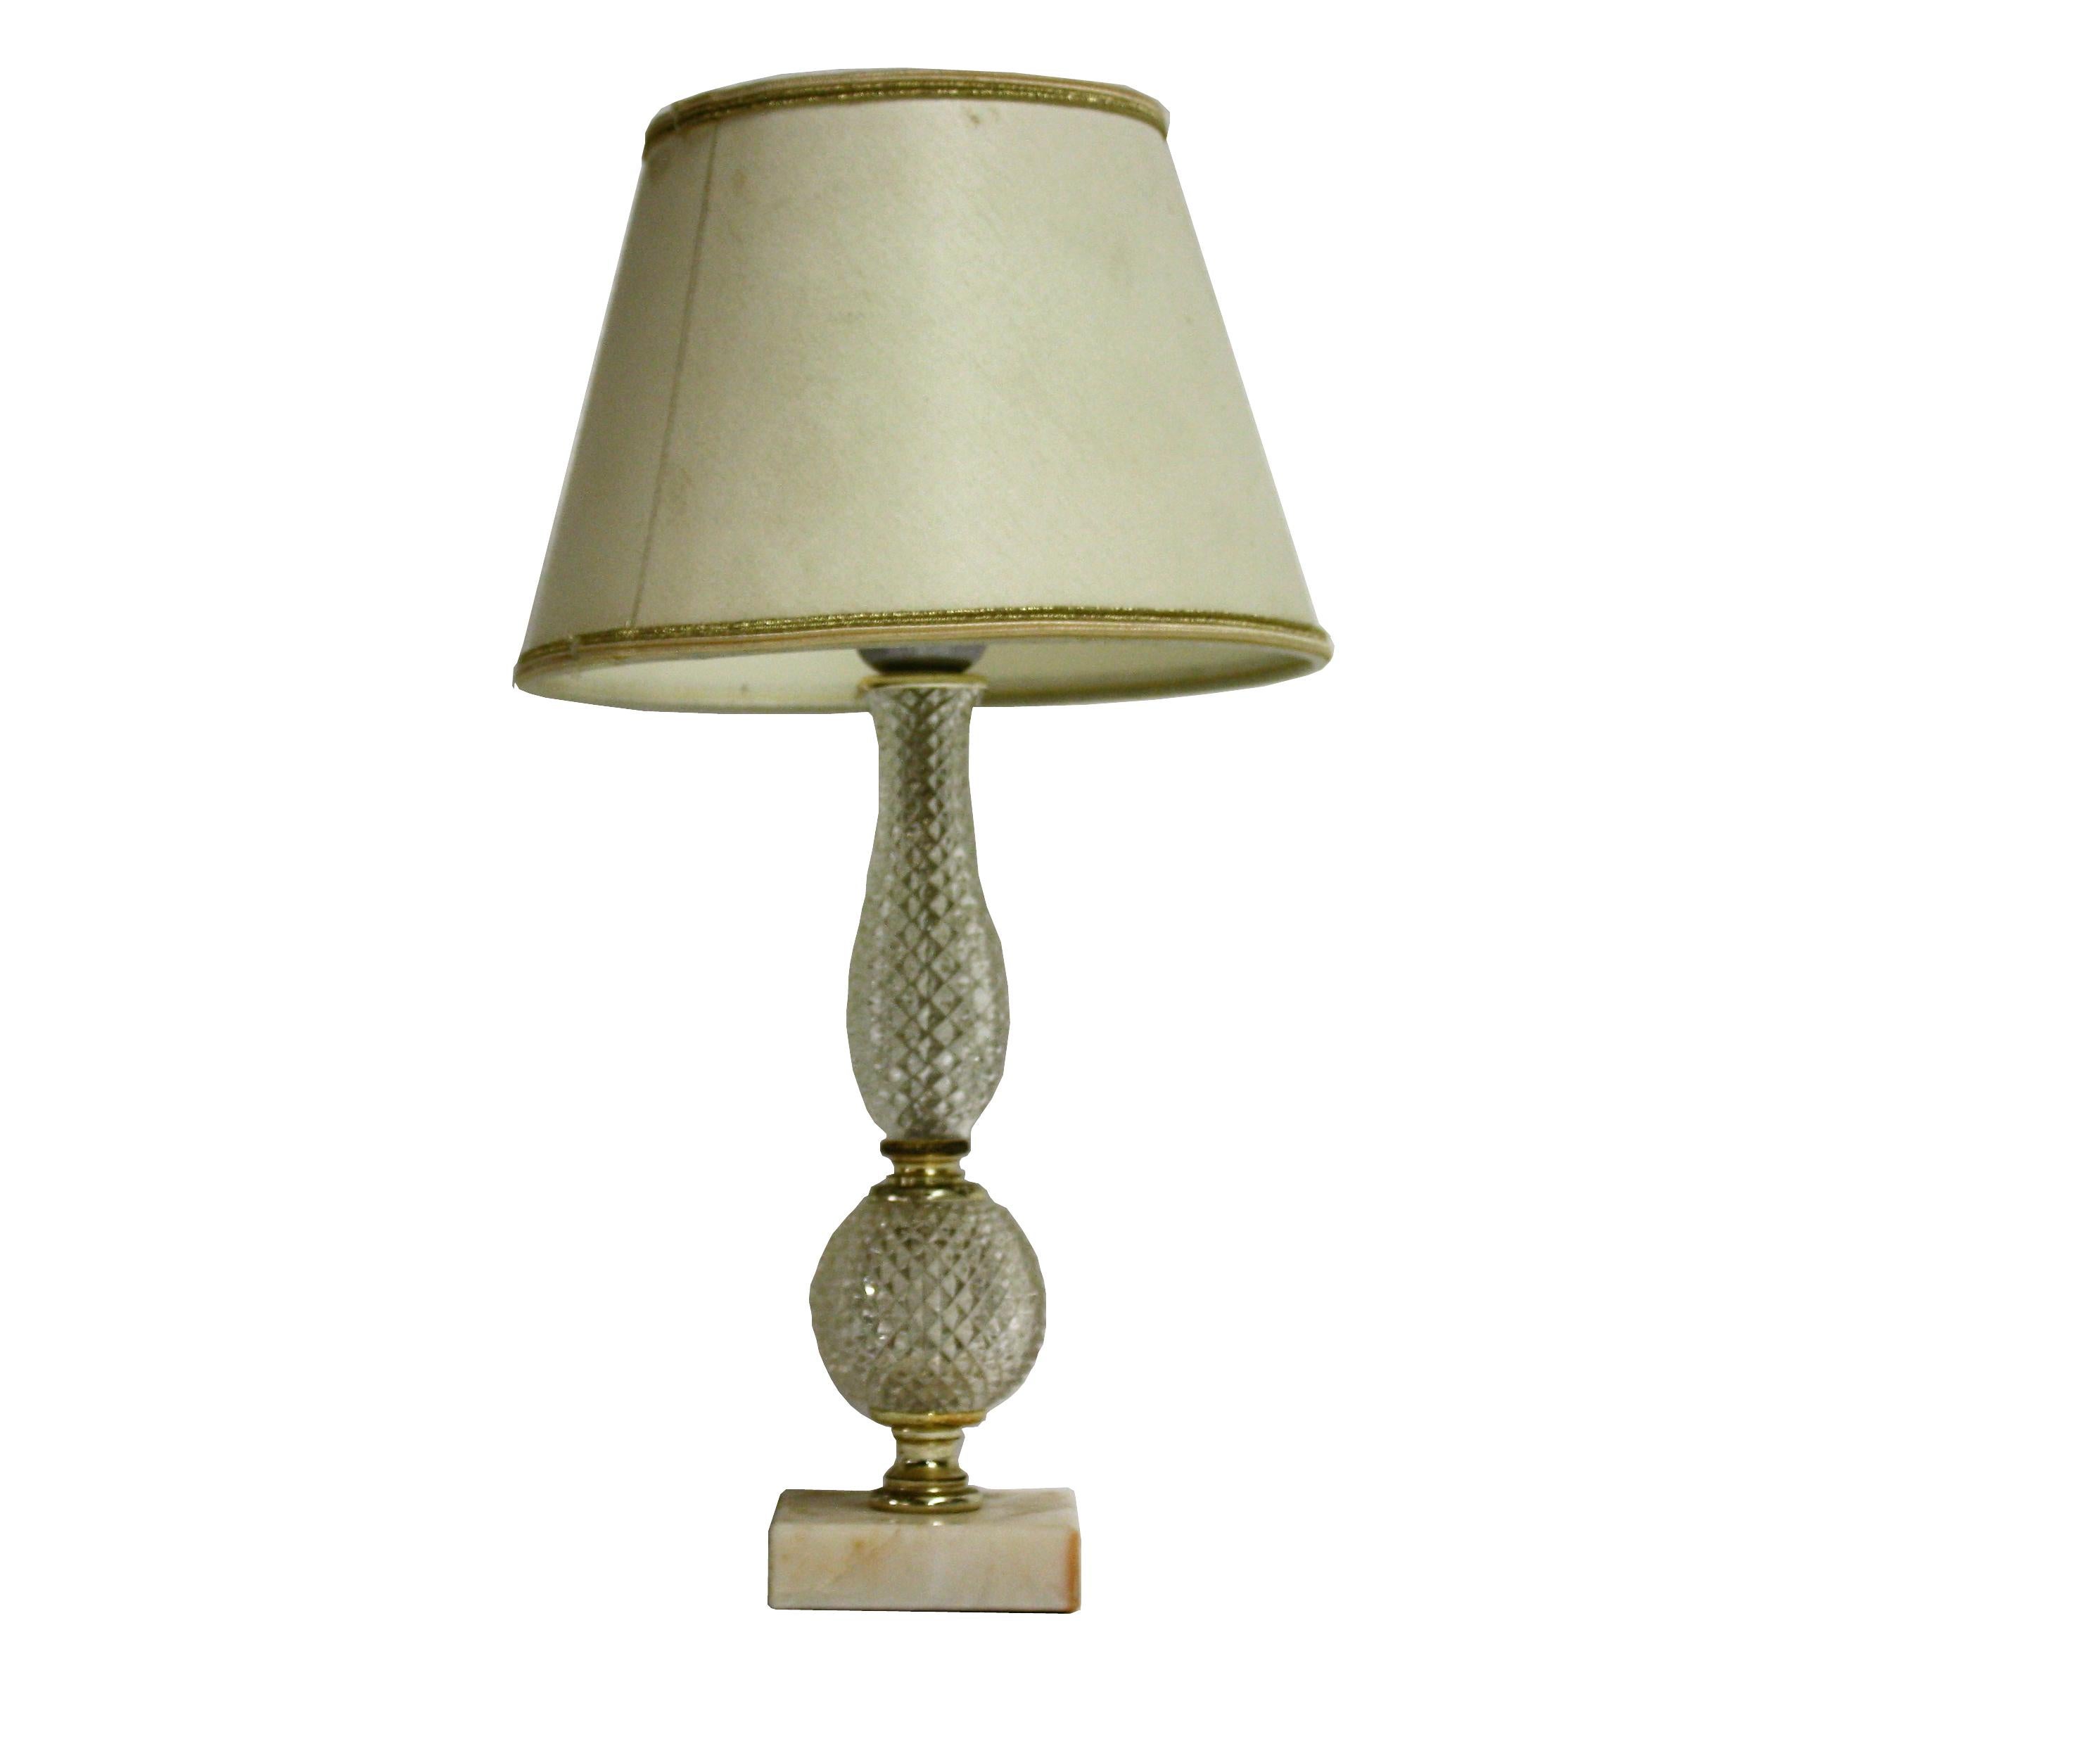 Charming table lamp made from a brass and crystal glass centrepiece mounted on a marble base.

The original fabric lamp shade with a golden finish is still in good condition.

Very classical yet charming table lamp.

Tested and ready for